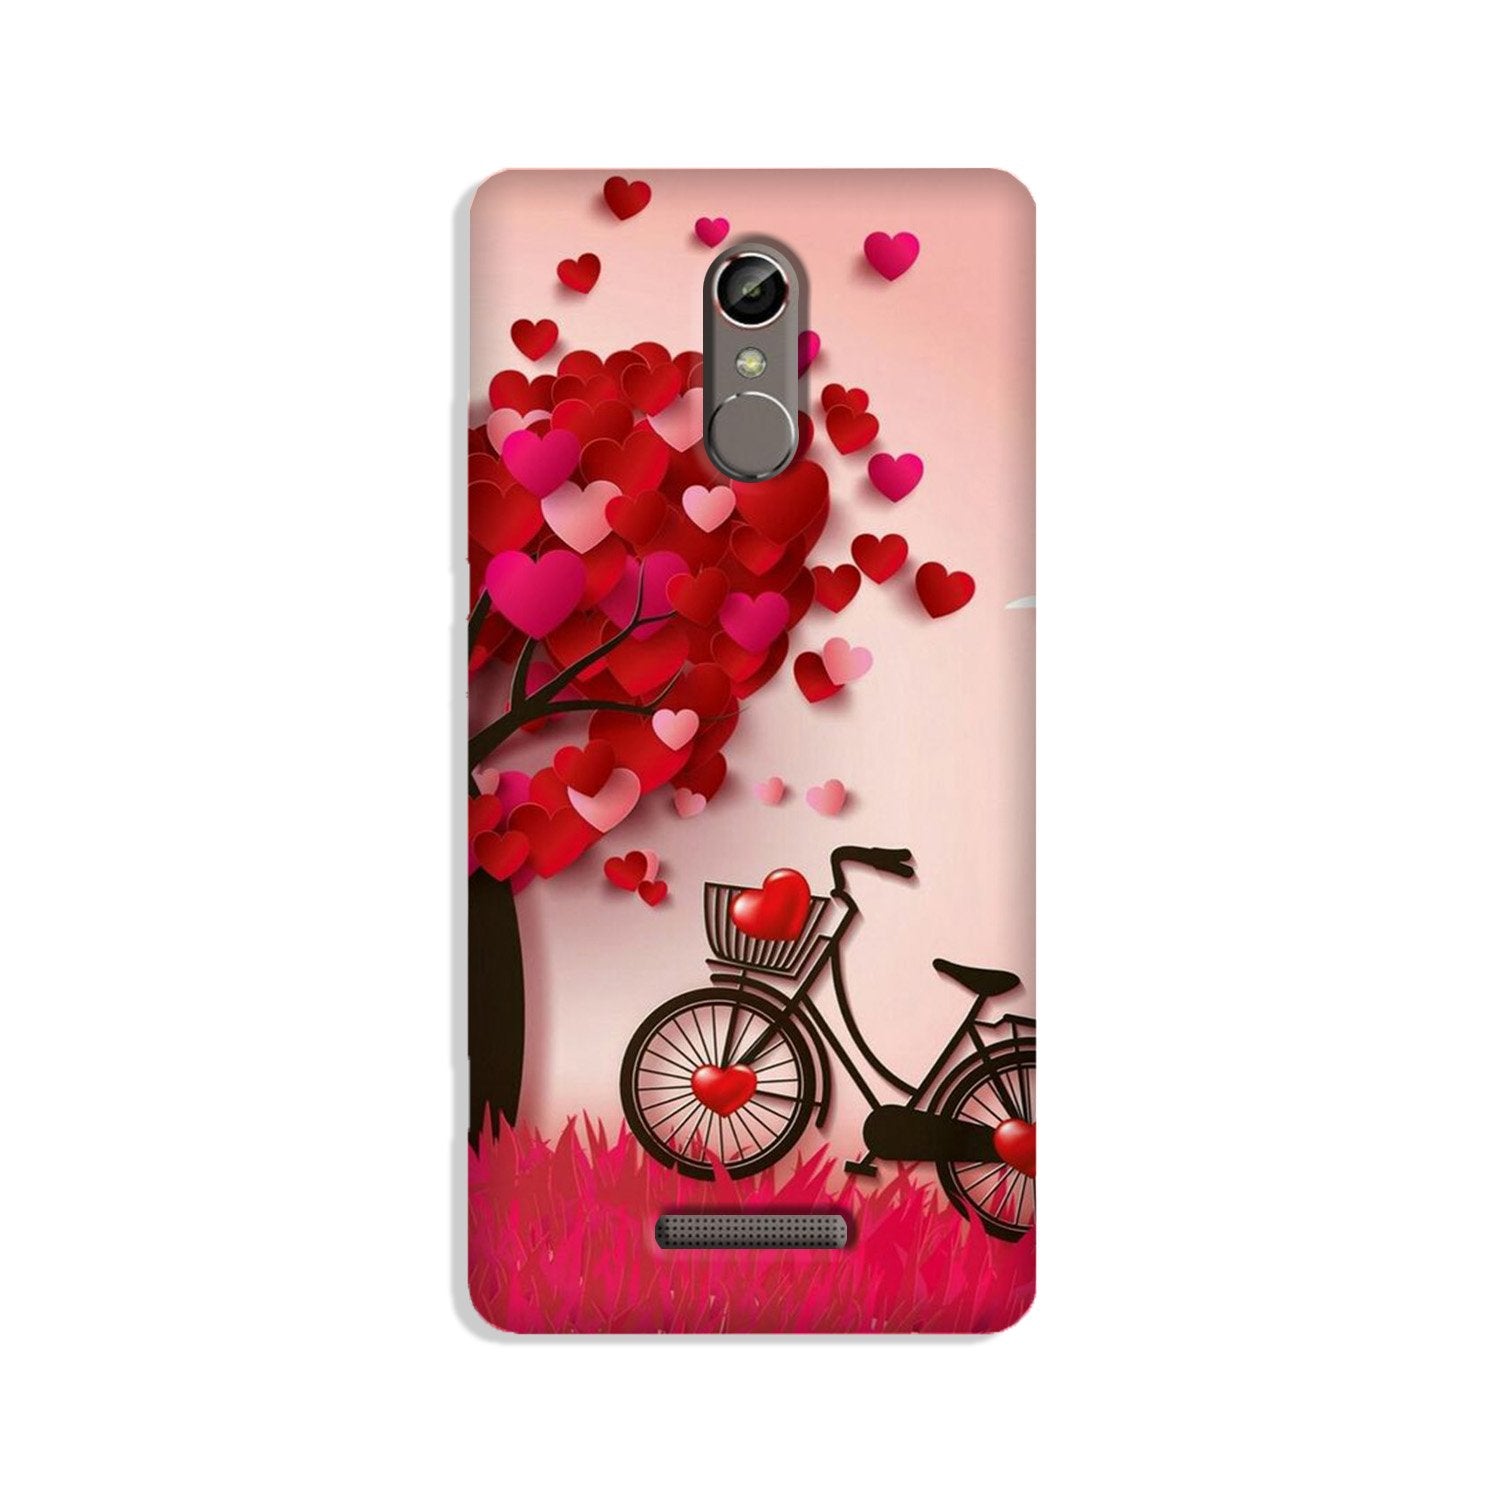 Red Heart Cycle Case for Gionee S6s (Design No. 222)